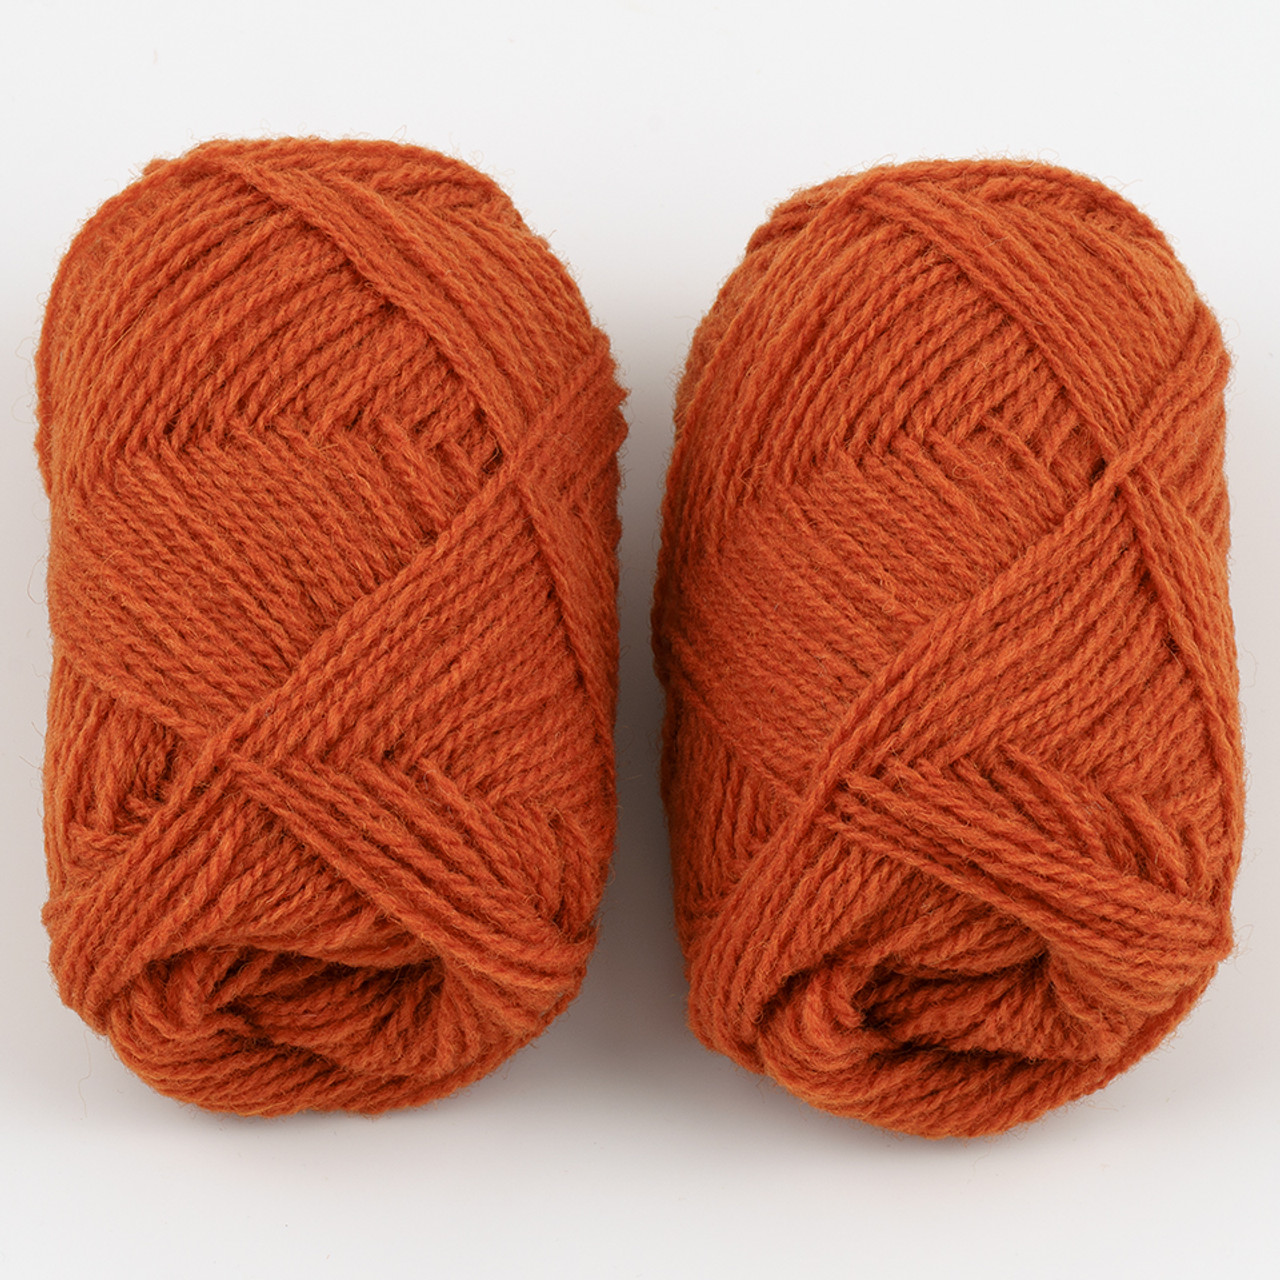 nægte Rindende Vil have Jamieson & Smith, 2ply Jumper Weight // 125 at The Loopy Ewe